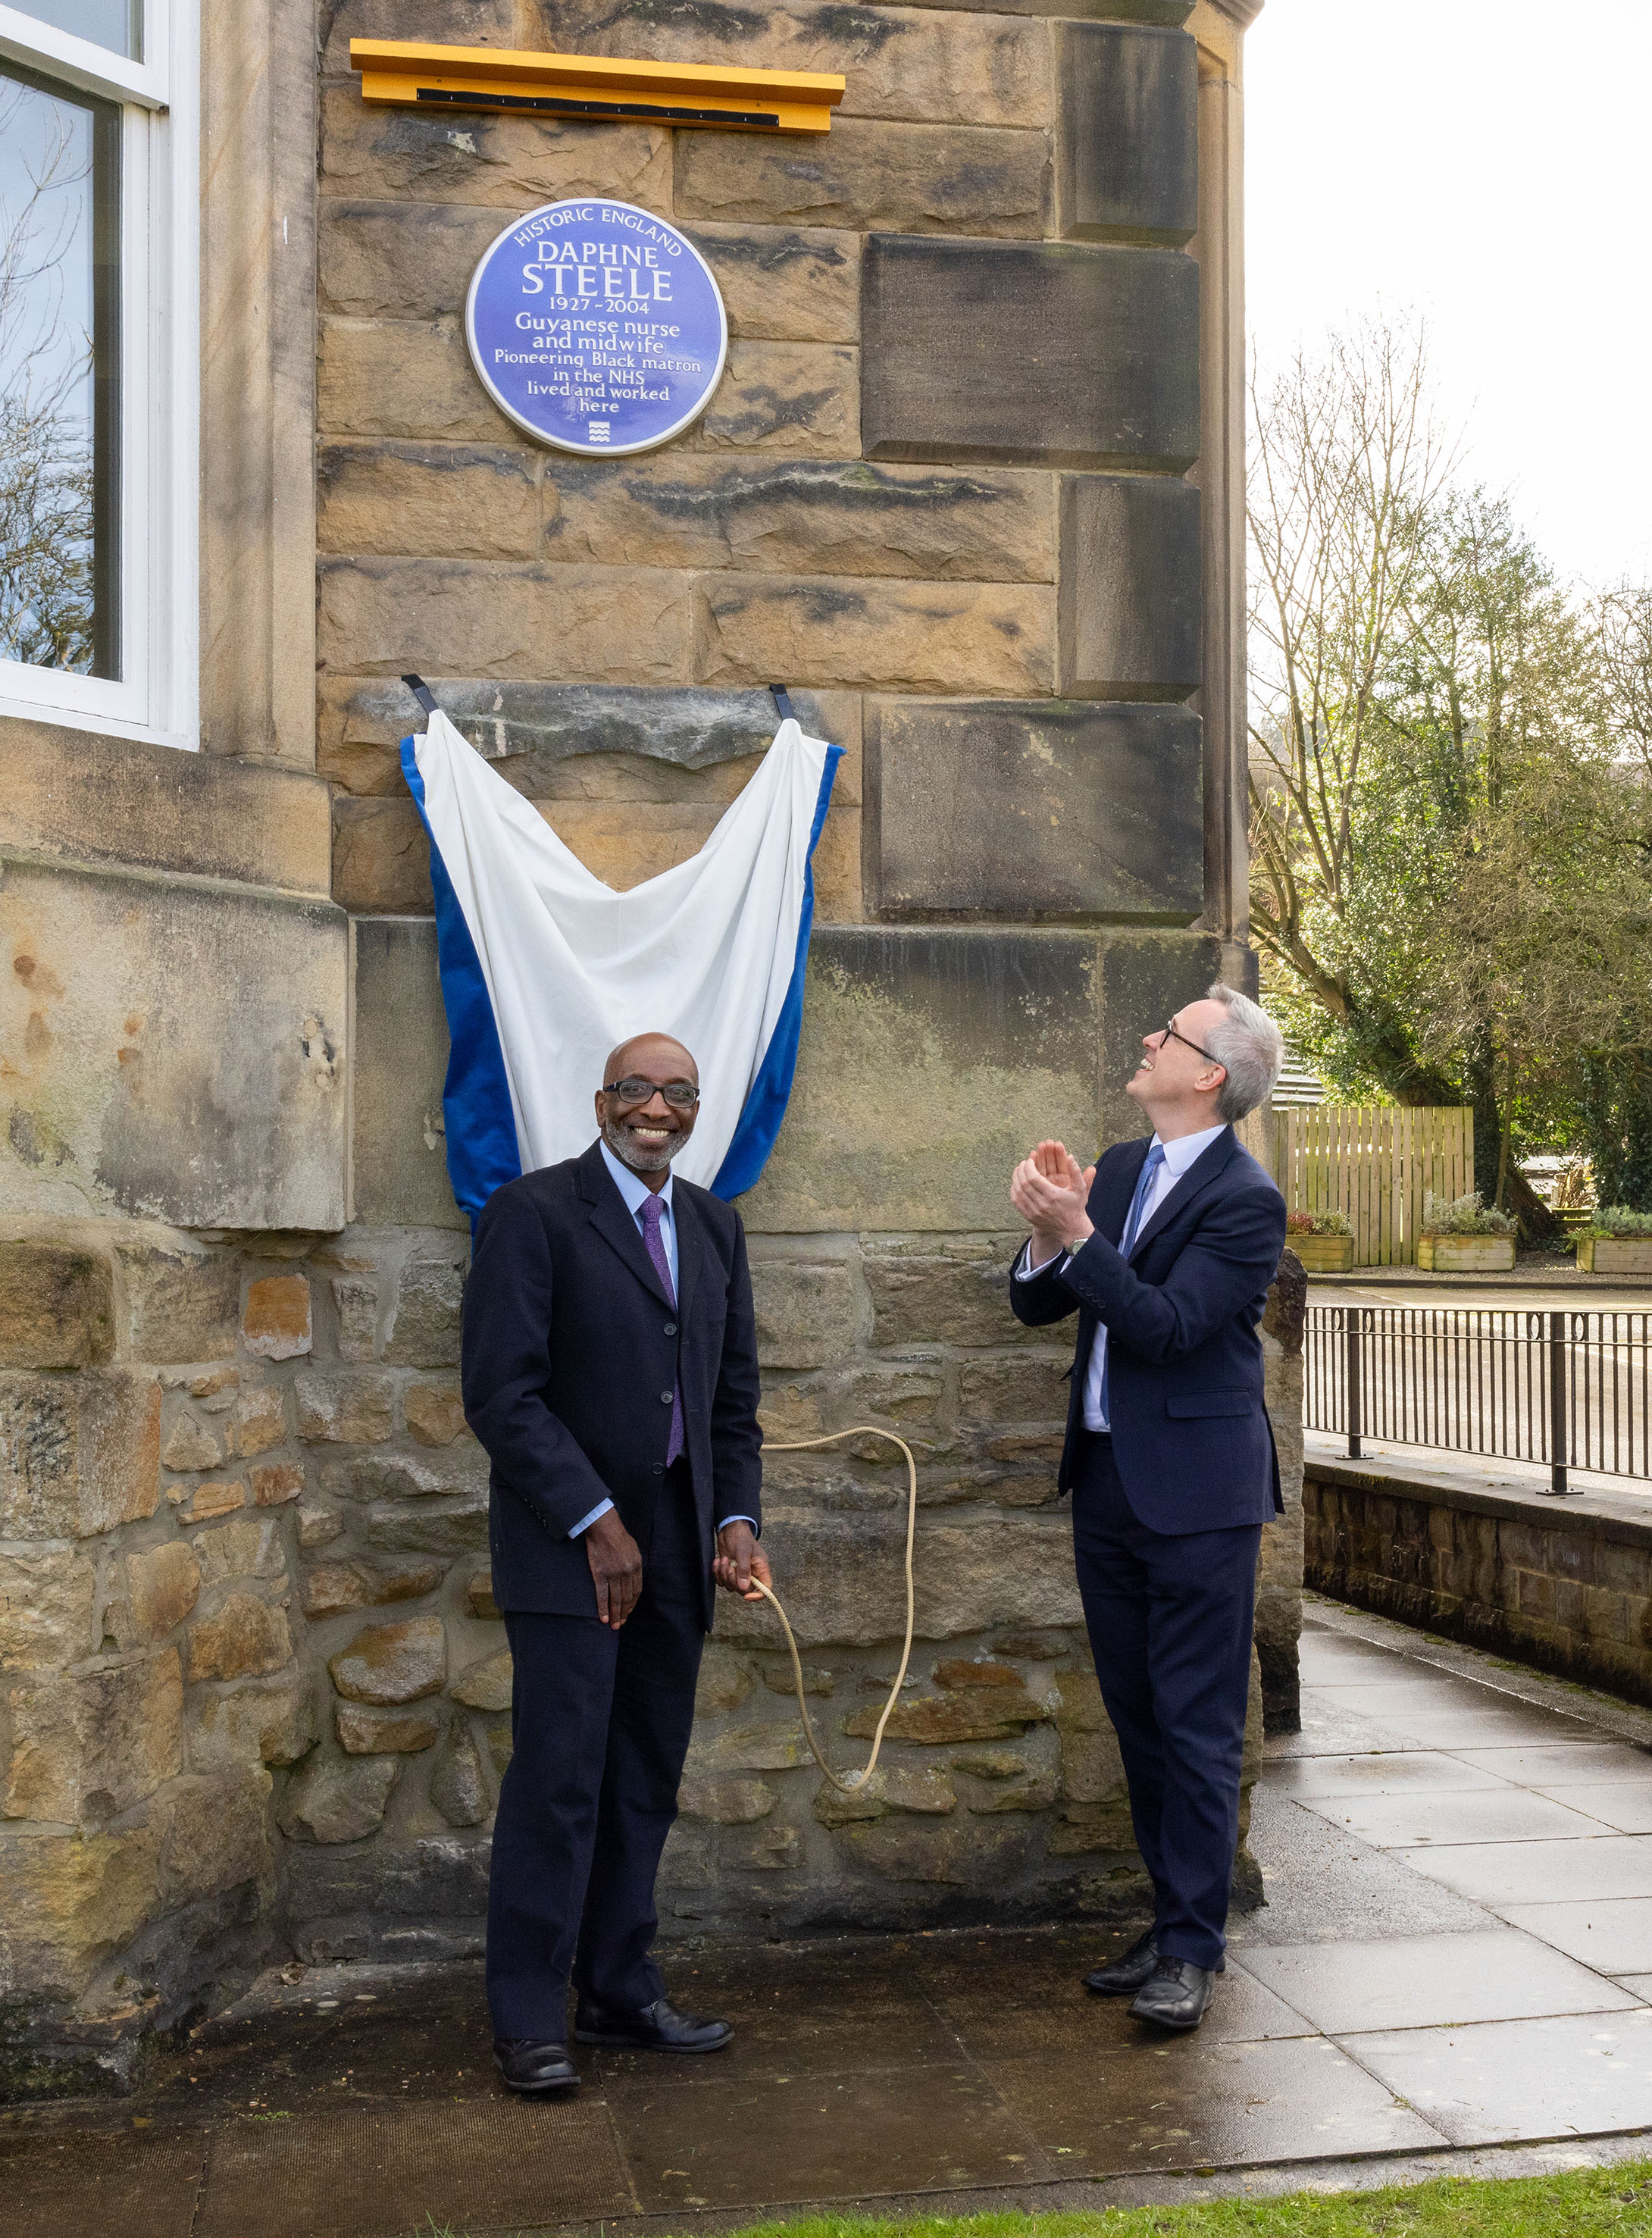 Two smiling men in suits standing underneath a heritage blue plaque in the moments after its unveiling